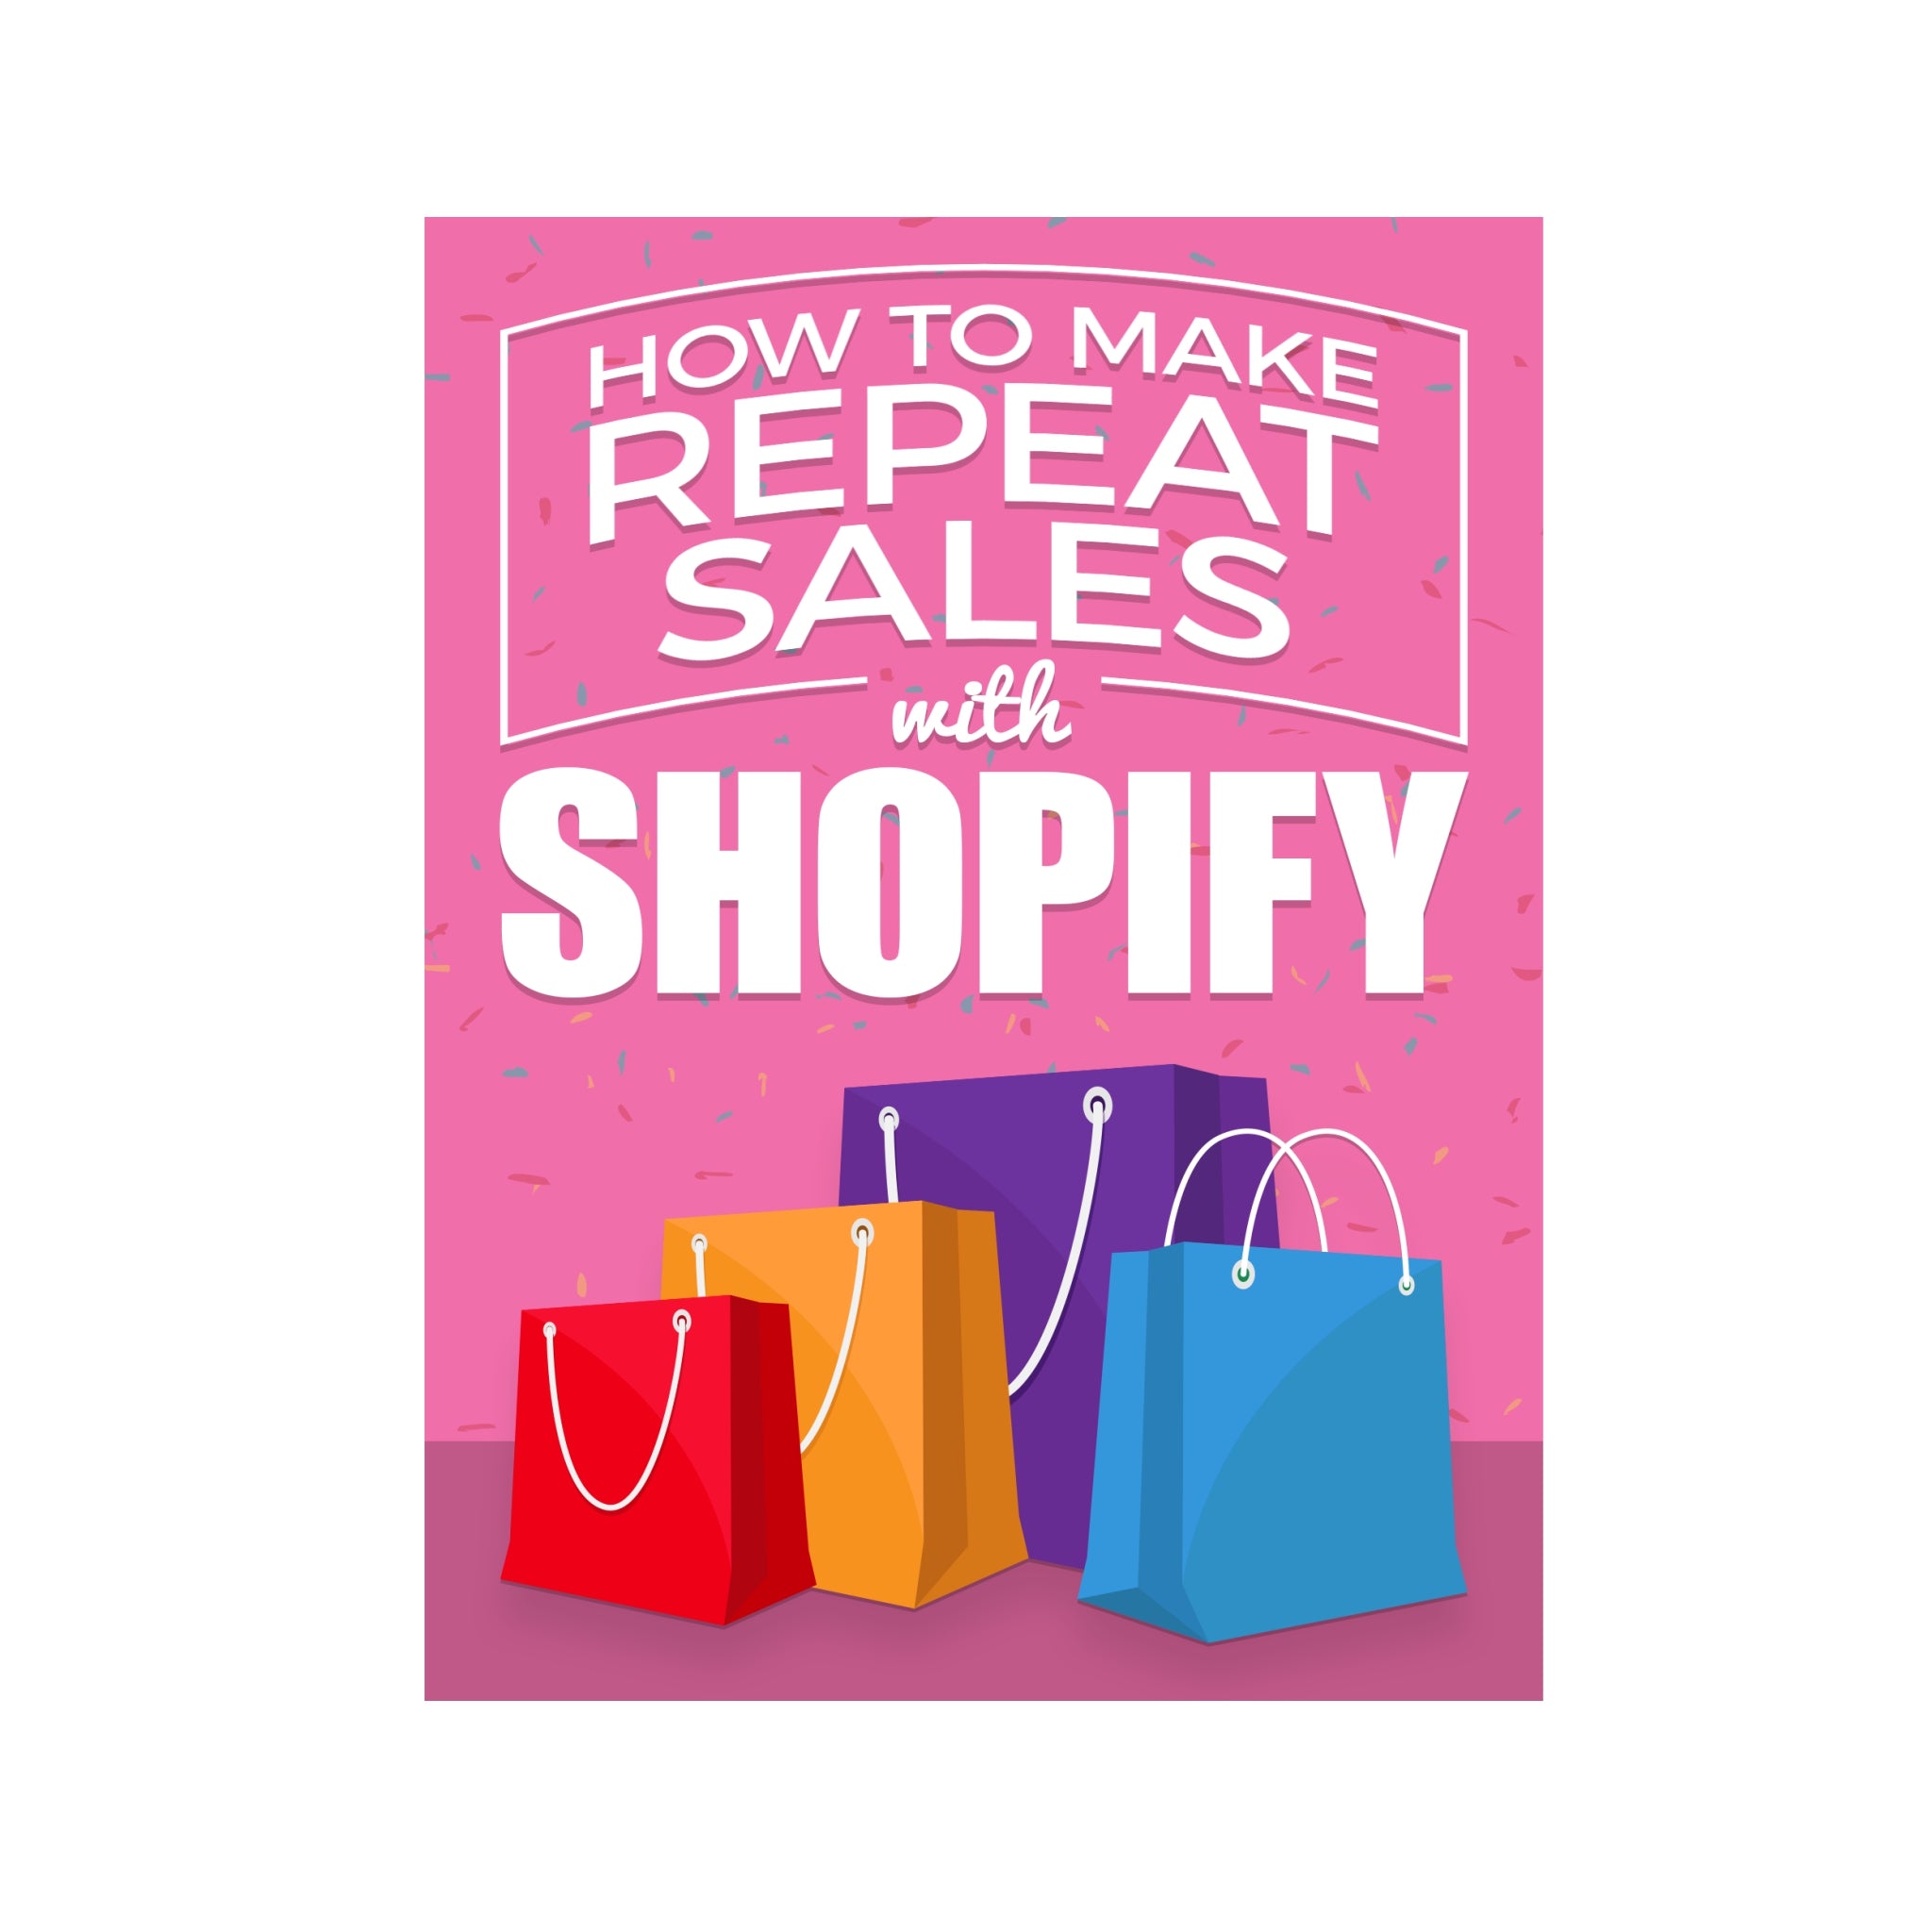 How To Make Repeat Sales with Shopify Ebook